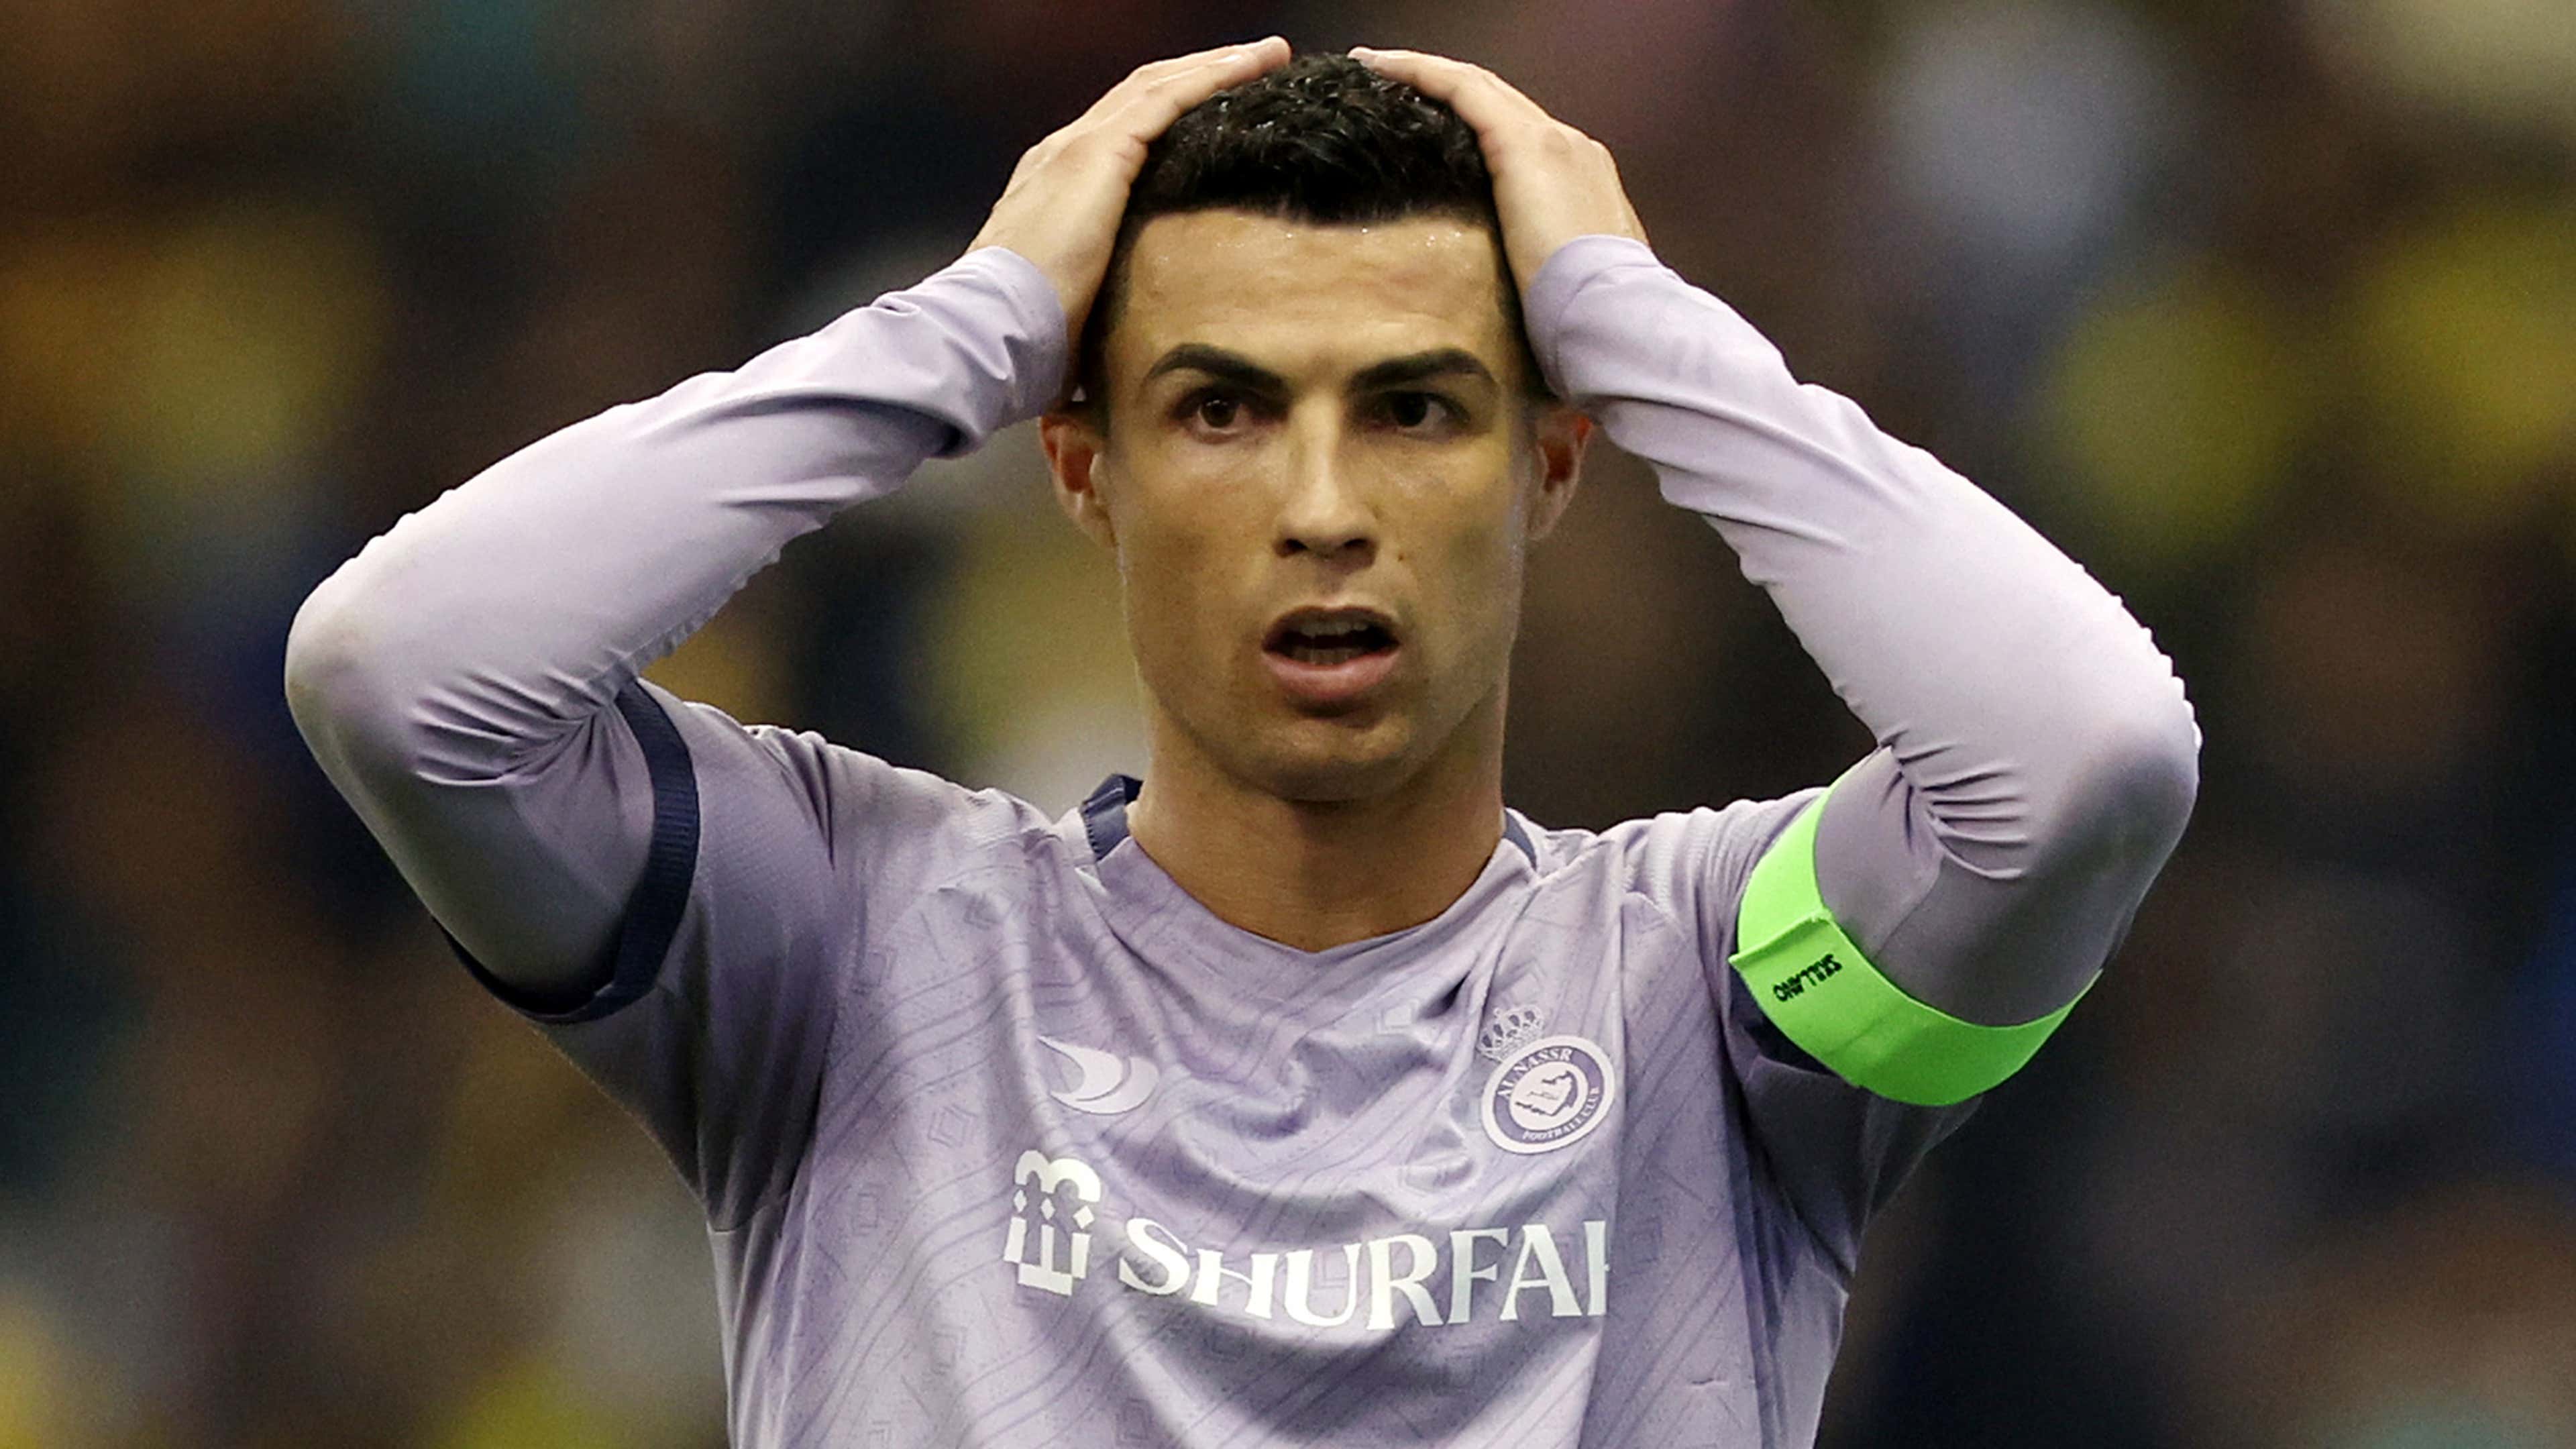 Cristiano Ronaldo tells his fans they 'don't have to hate Lionel